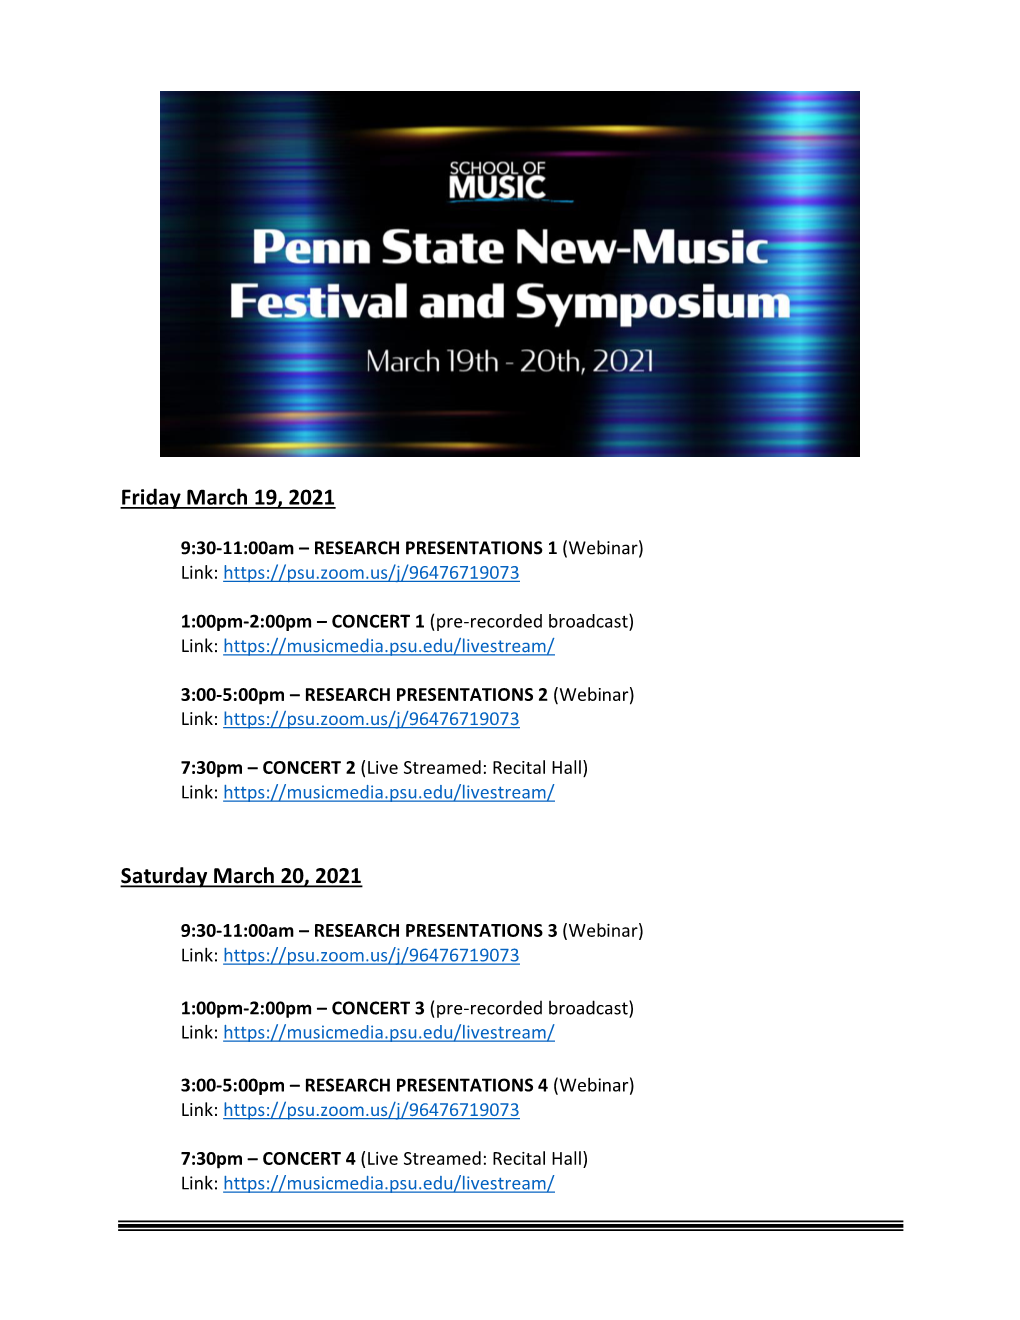 Penn State University 2021 New-Music Festival and Symposium